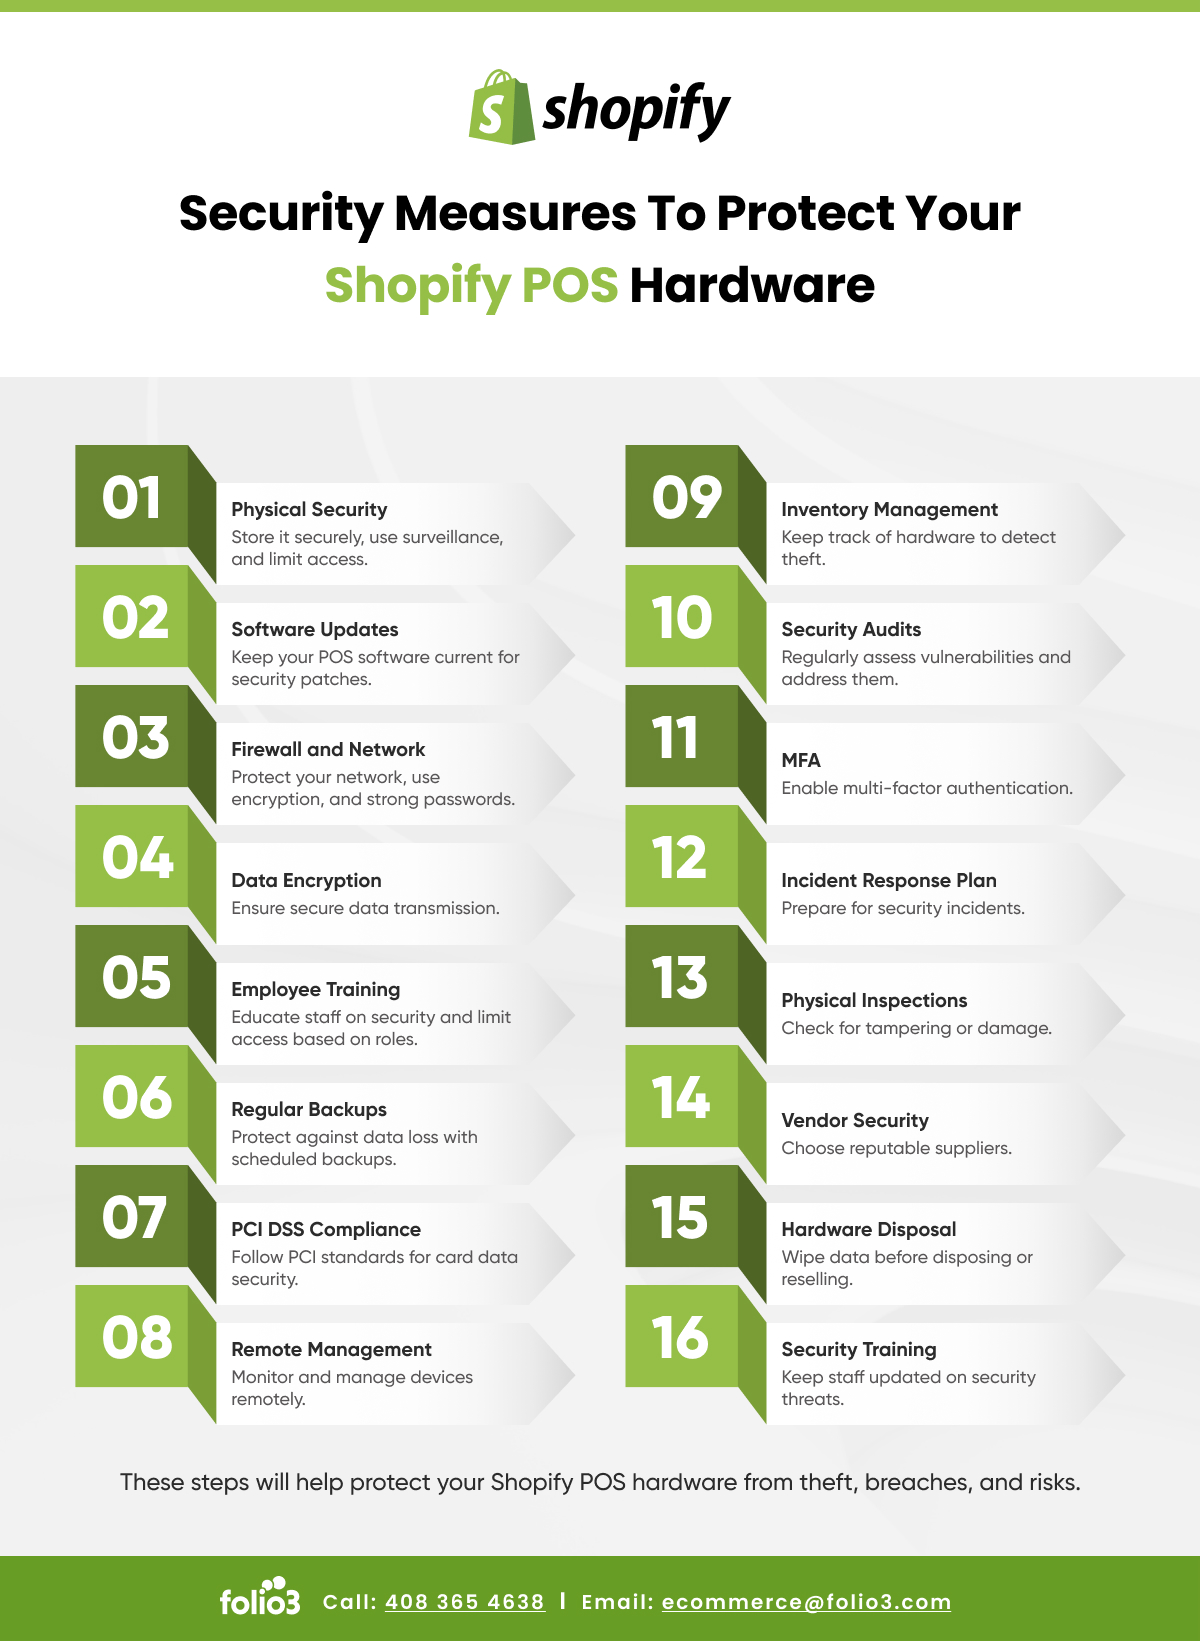 Security Measures to Protect Your Shopify POS Hardware